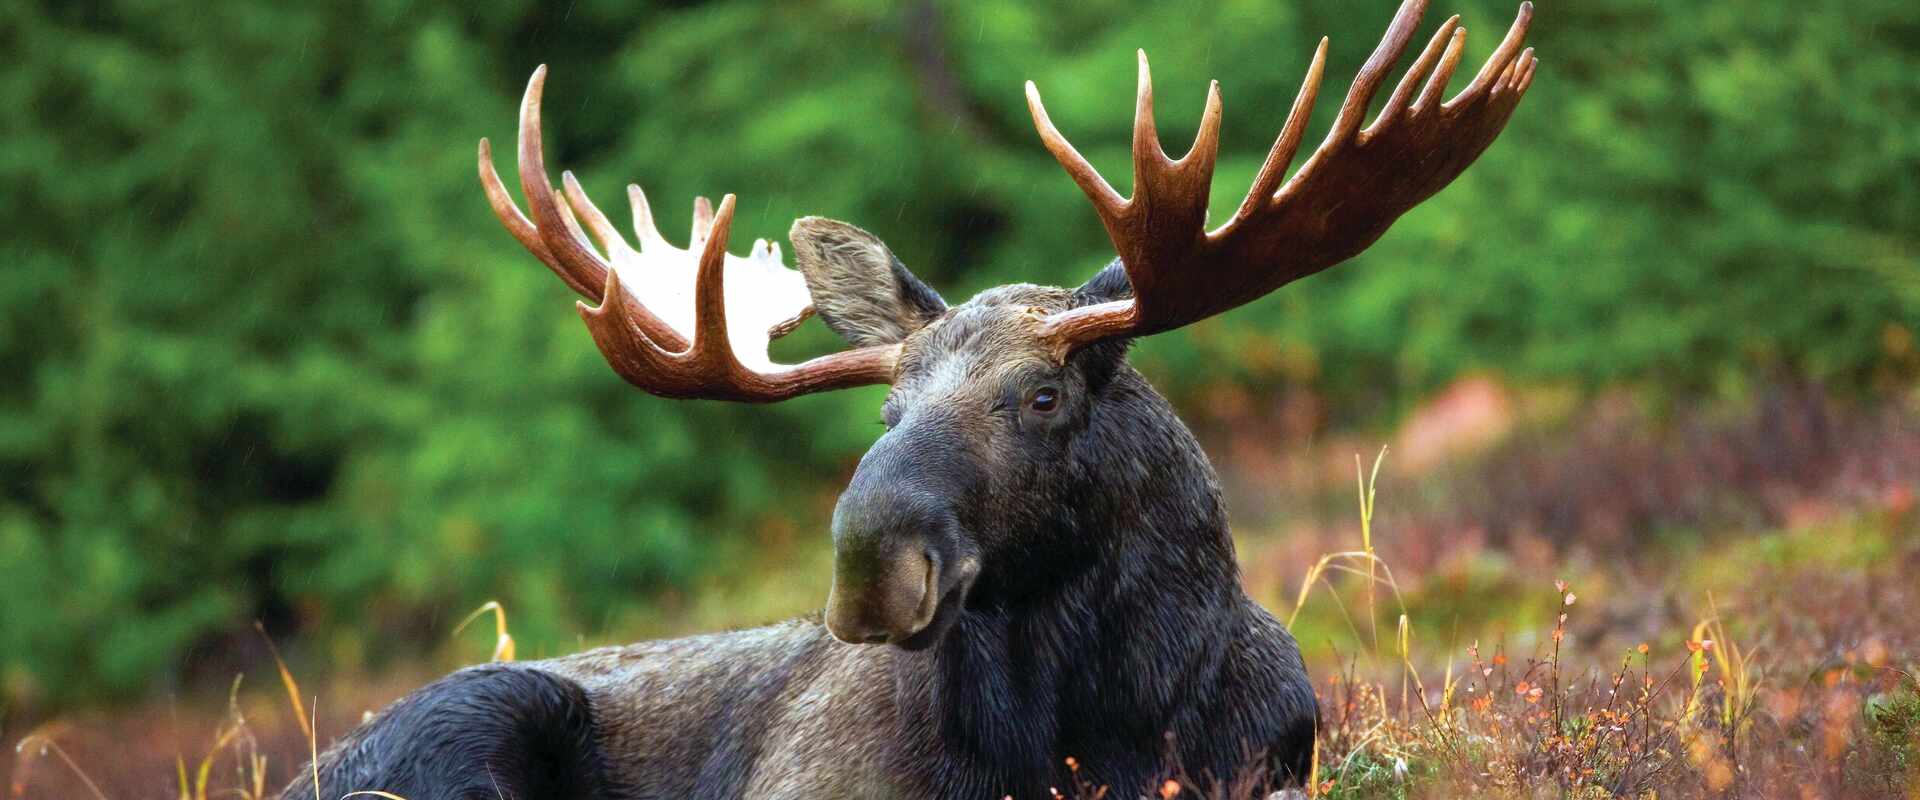 Mature moose with large antlers sitting amongst the autumn foliage